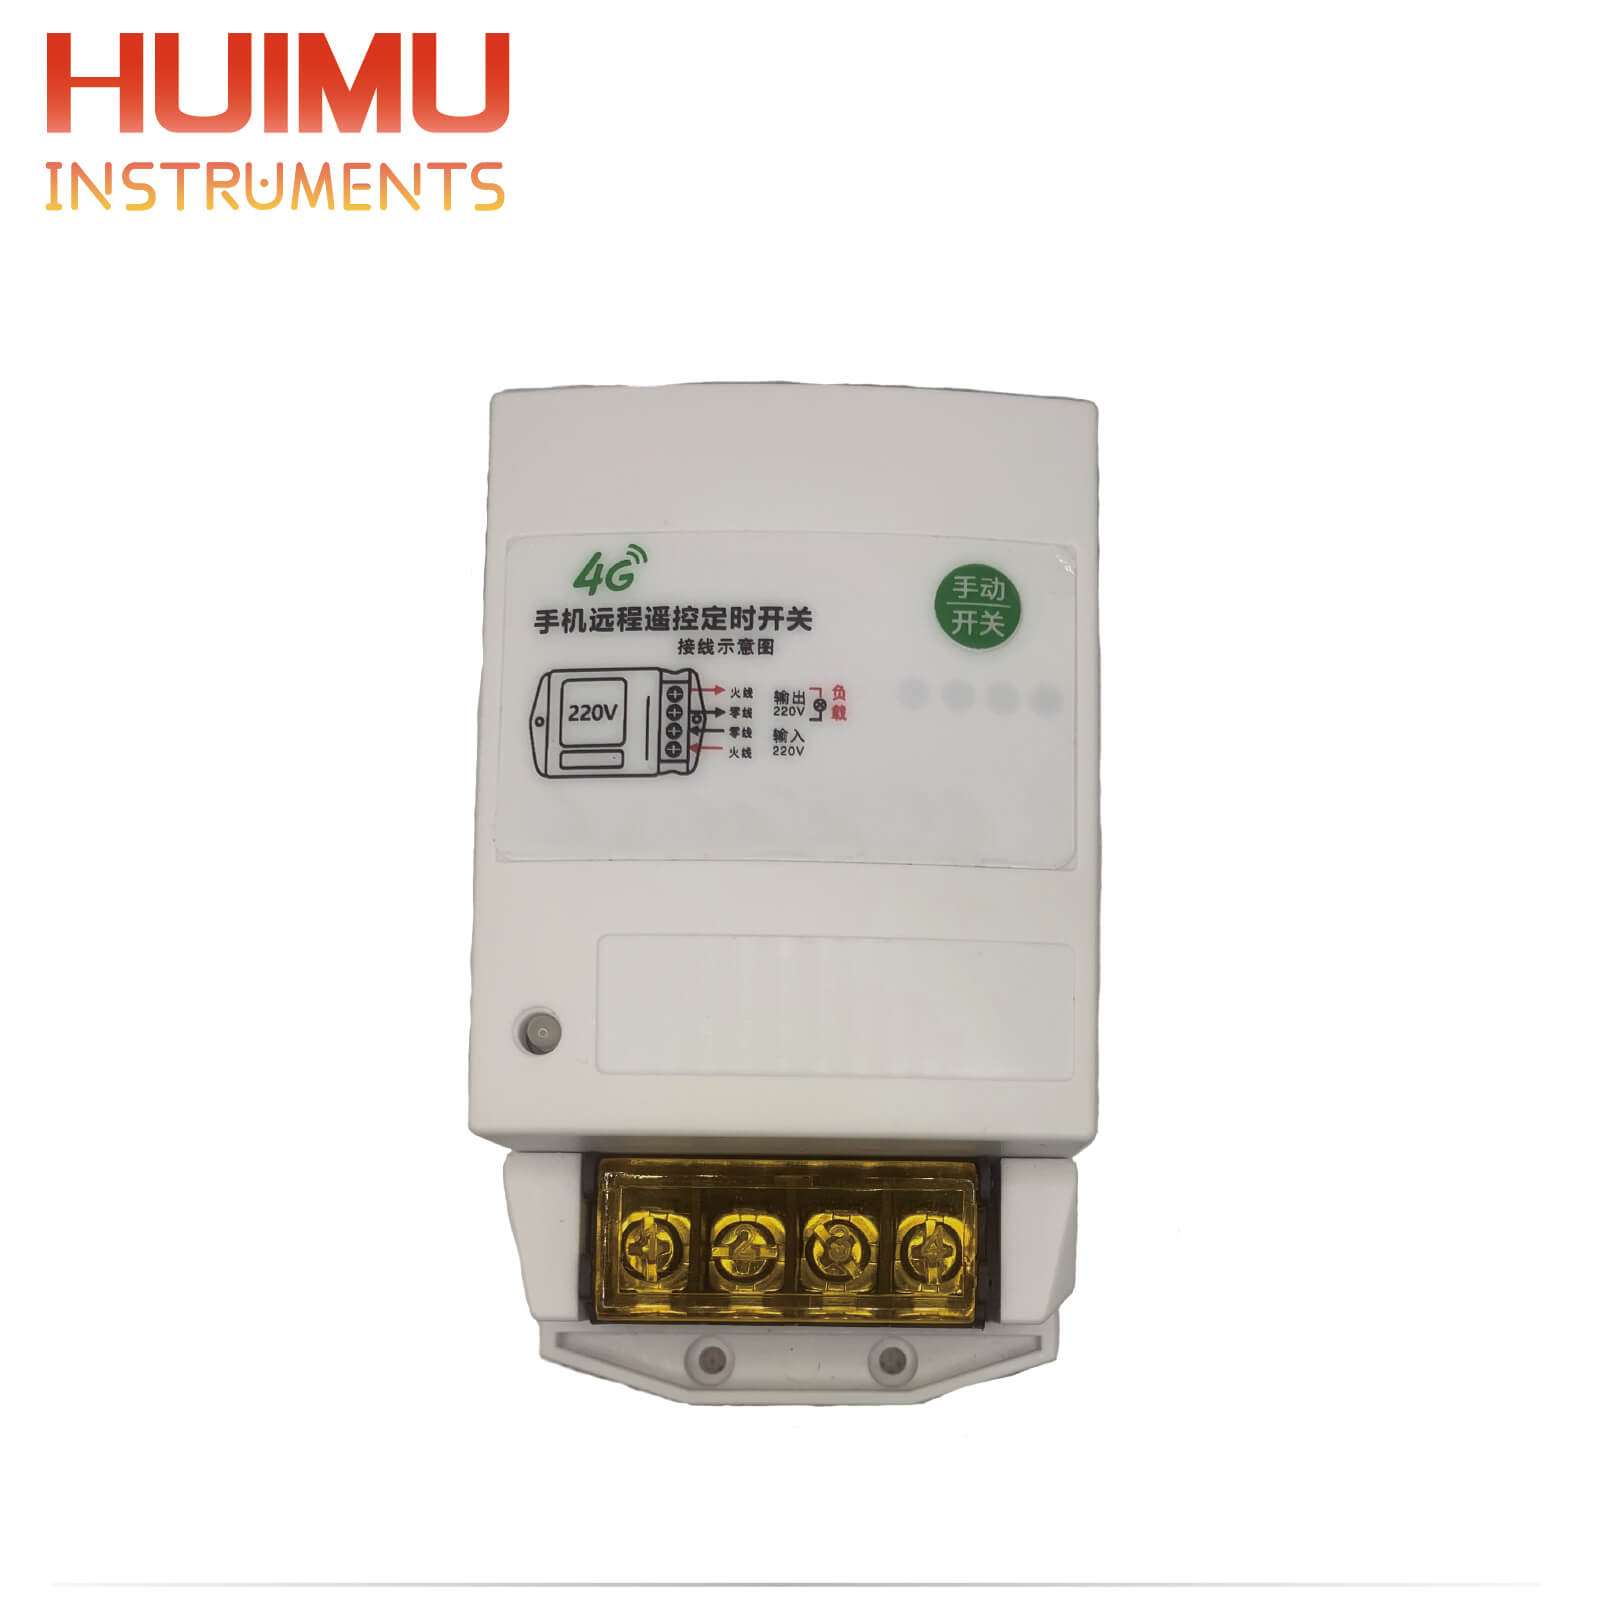 4G Series Smartphone Control Timer Switch